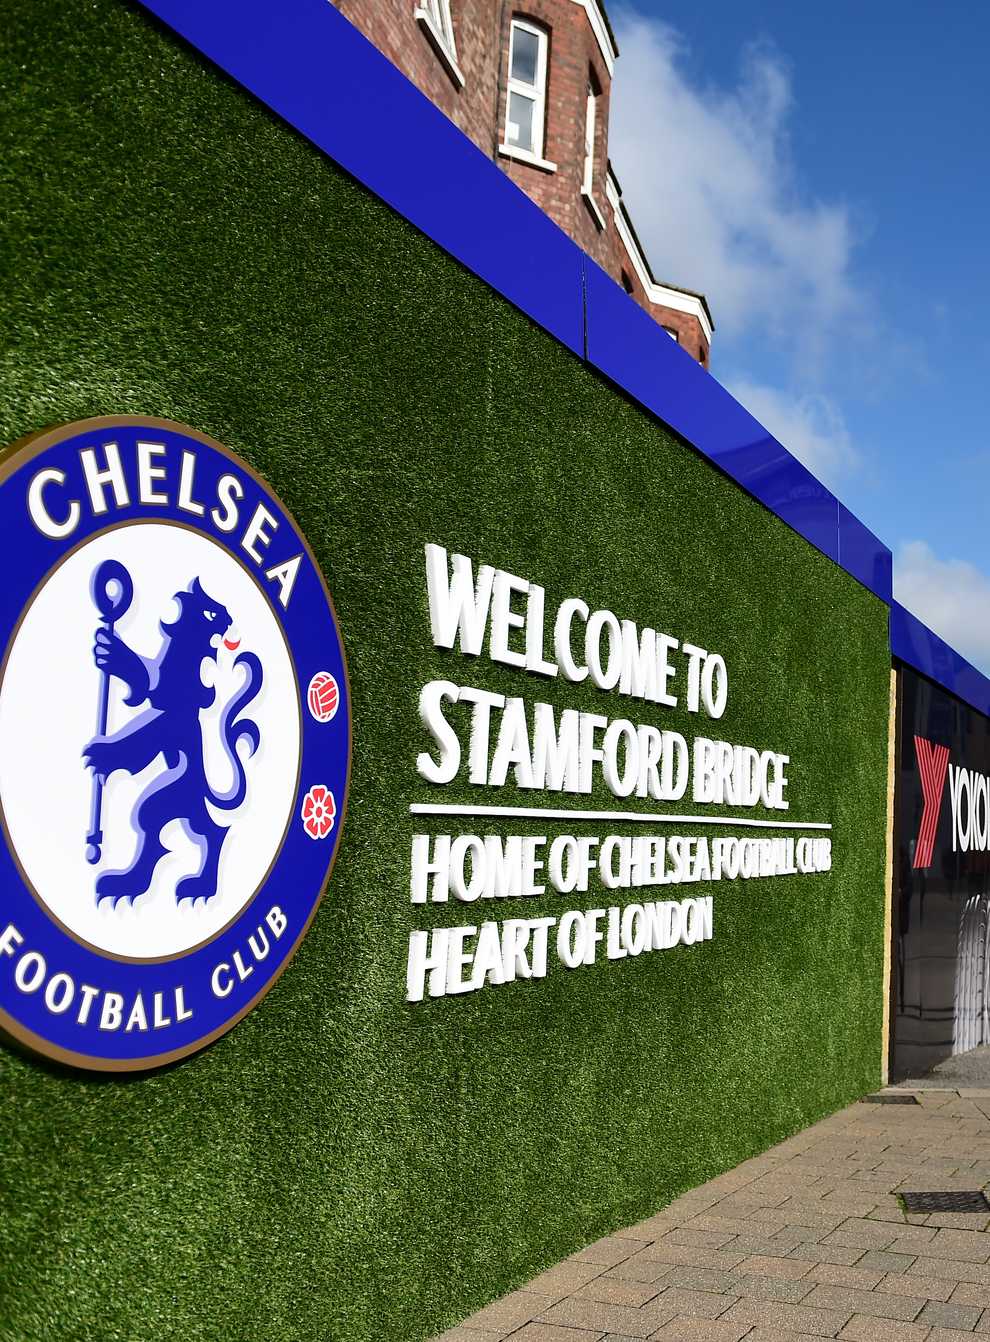 Chelsea have carried out a number initiatives to help the community during the coronavirus crisis (PA Images)